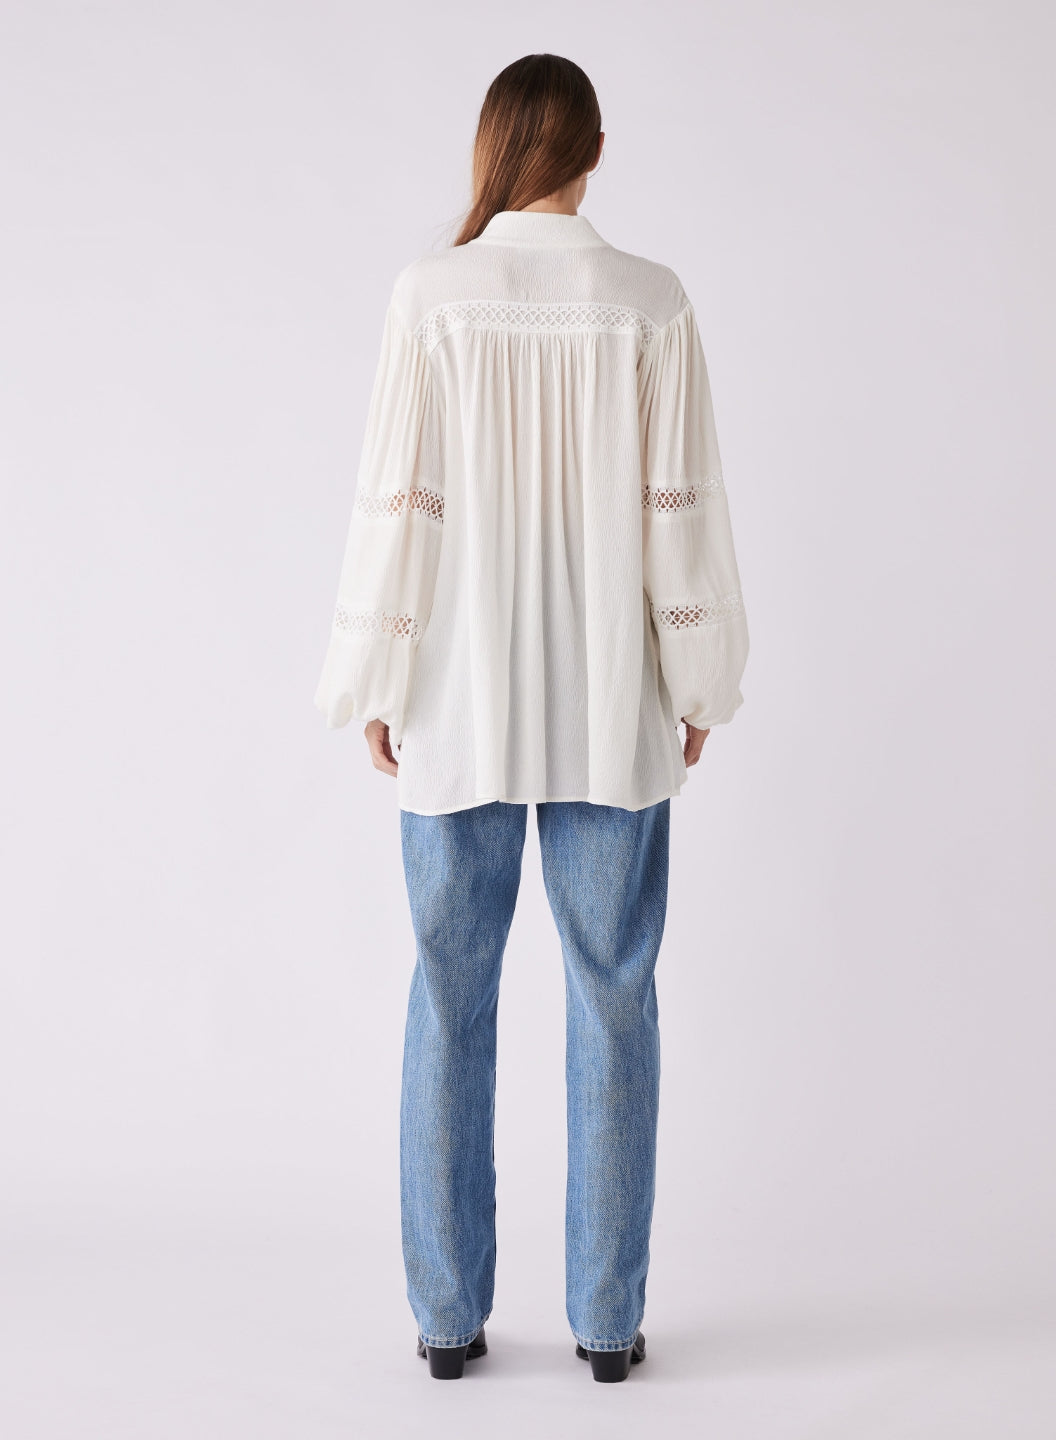 The Harp Blouse from Esmaee